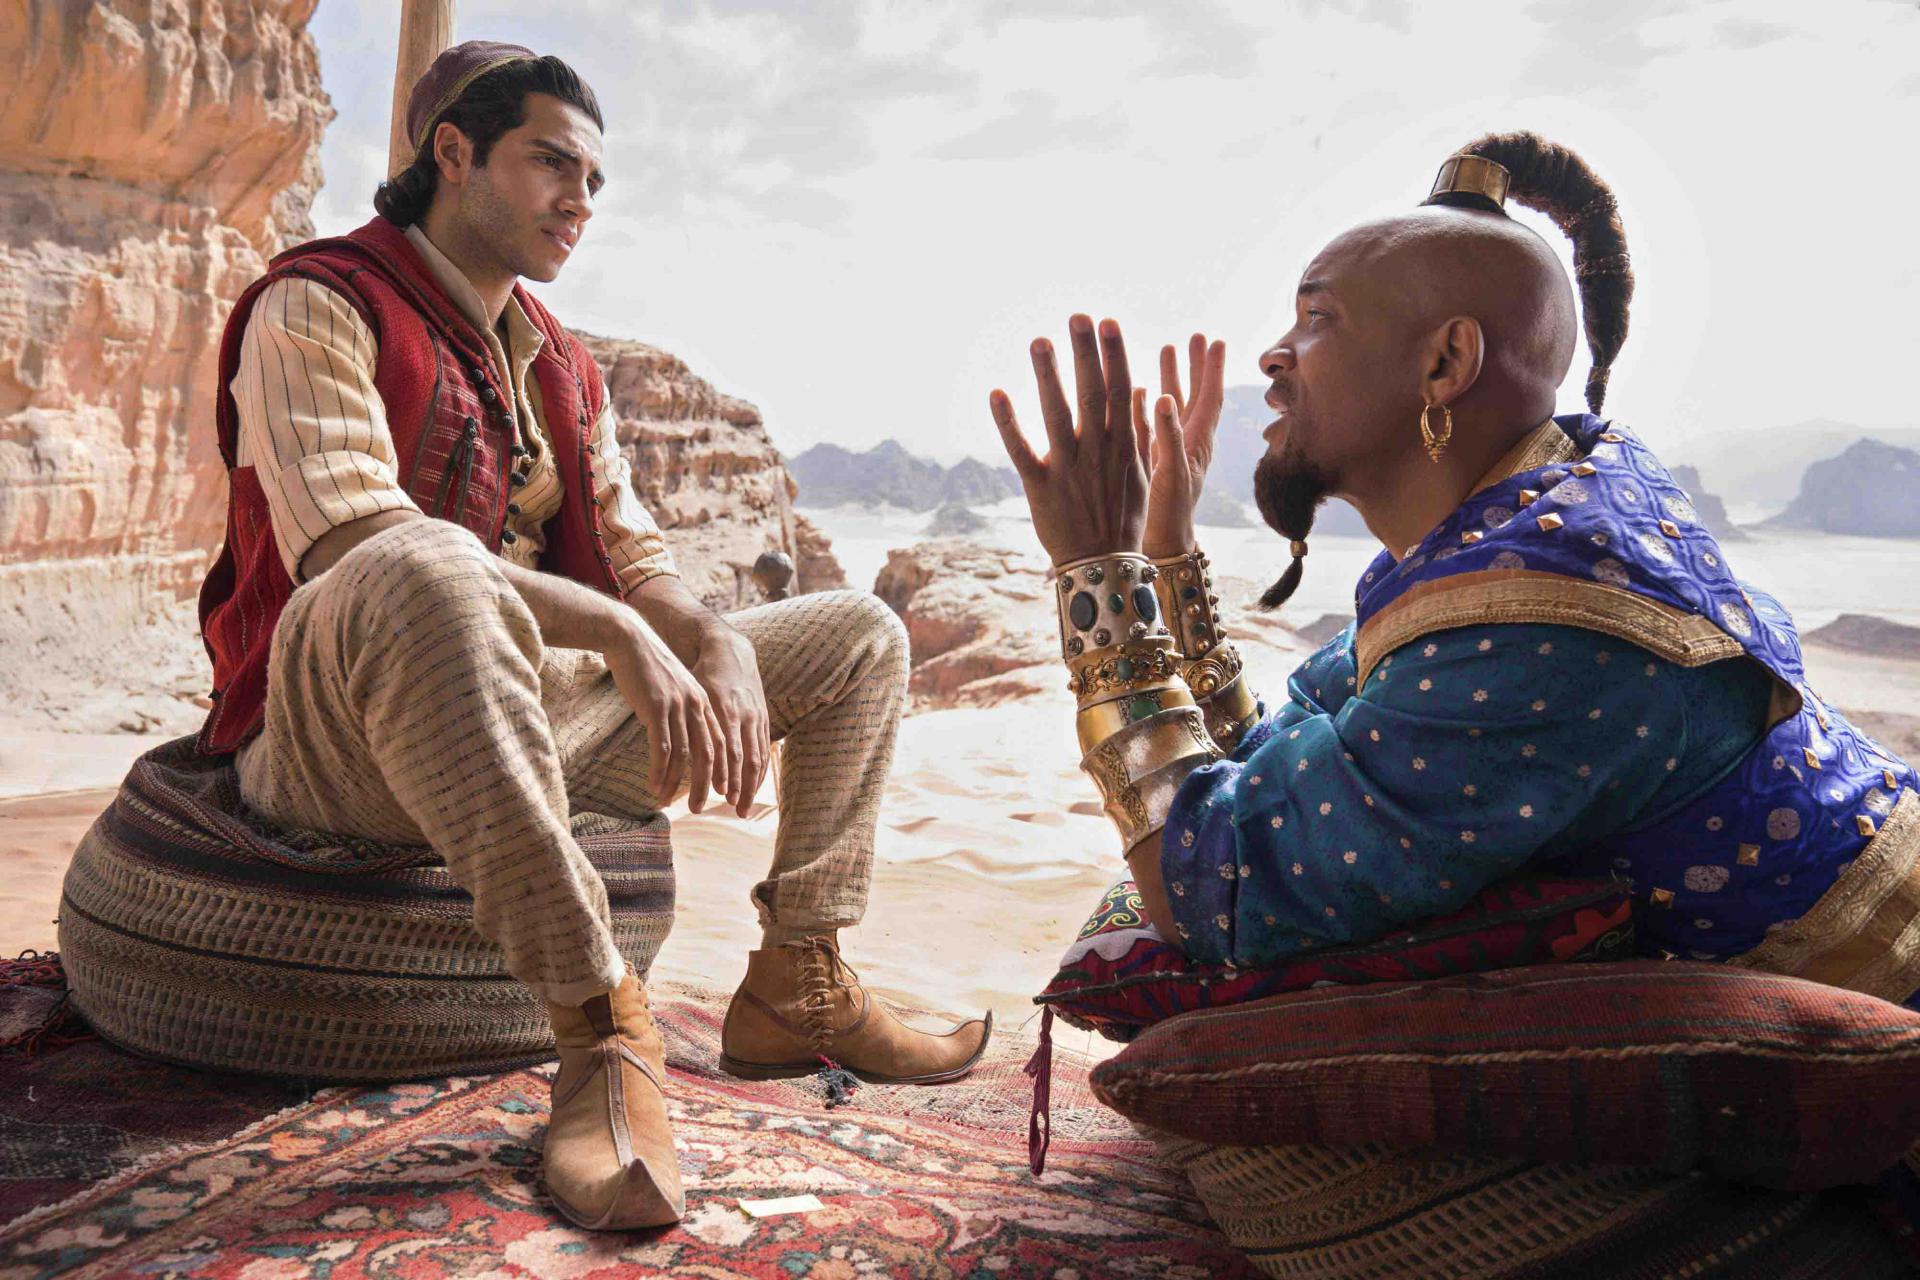 Mena Massoud as Aladdin (L) and Will Smith as Genie in Disney’s live-action adaptation of the 1992 animated classic “Aladdin.”